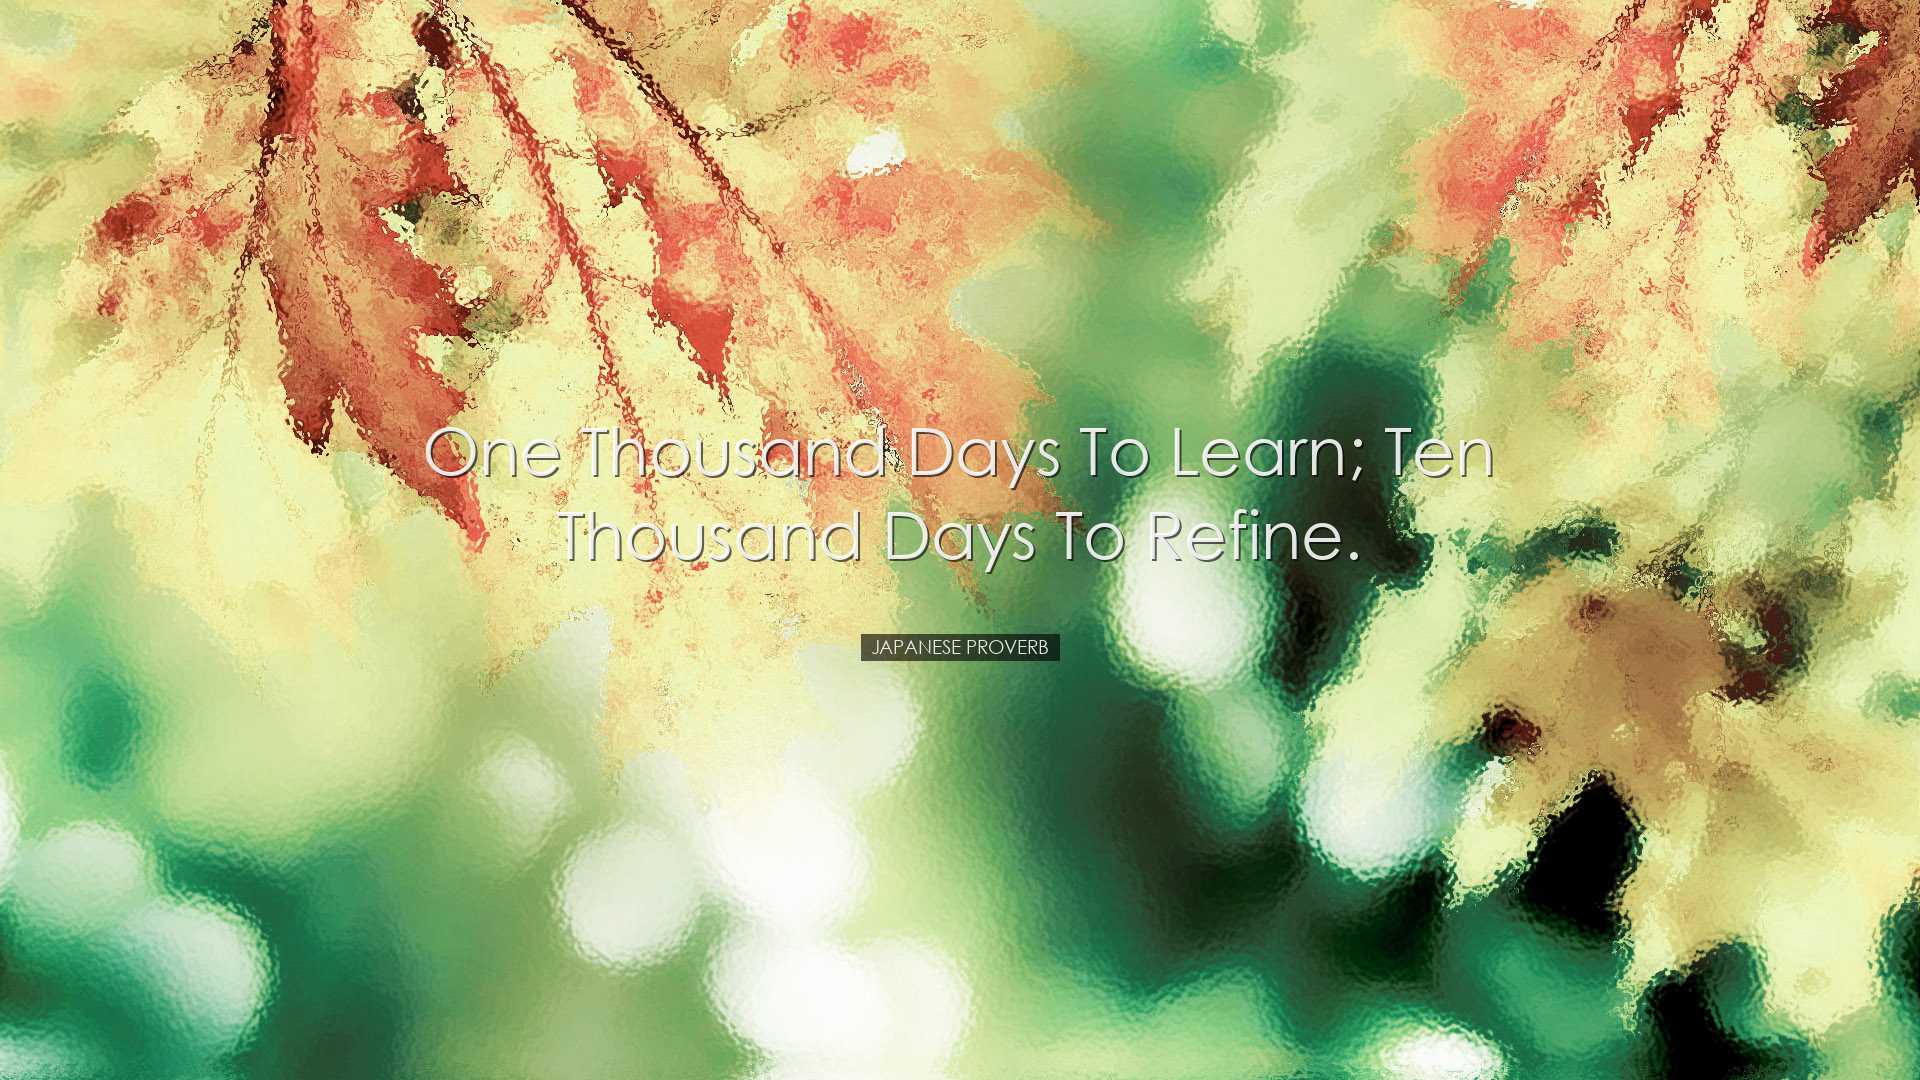 One thousand days to learn; ten thousand days to refine. - Japanes